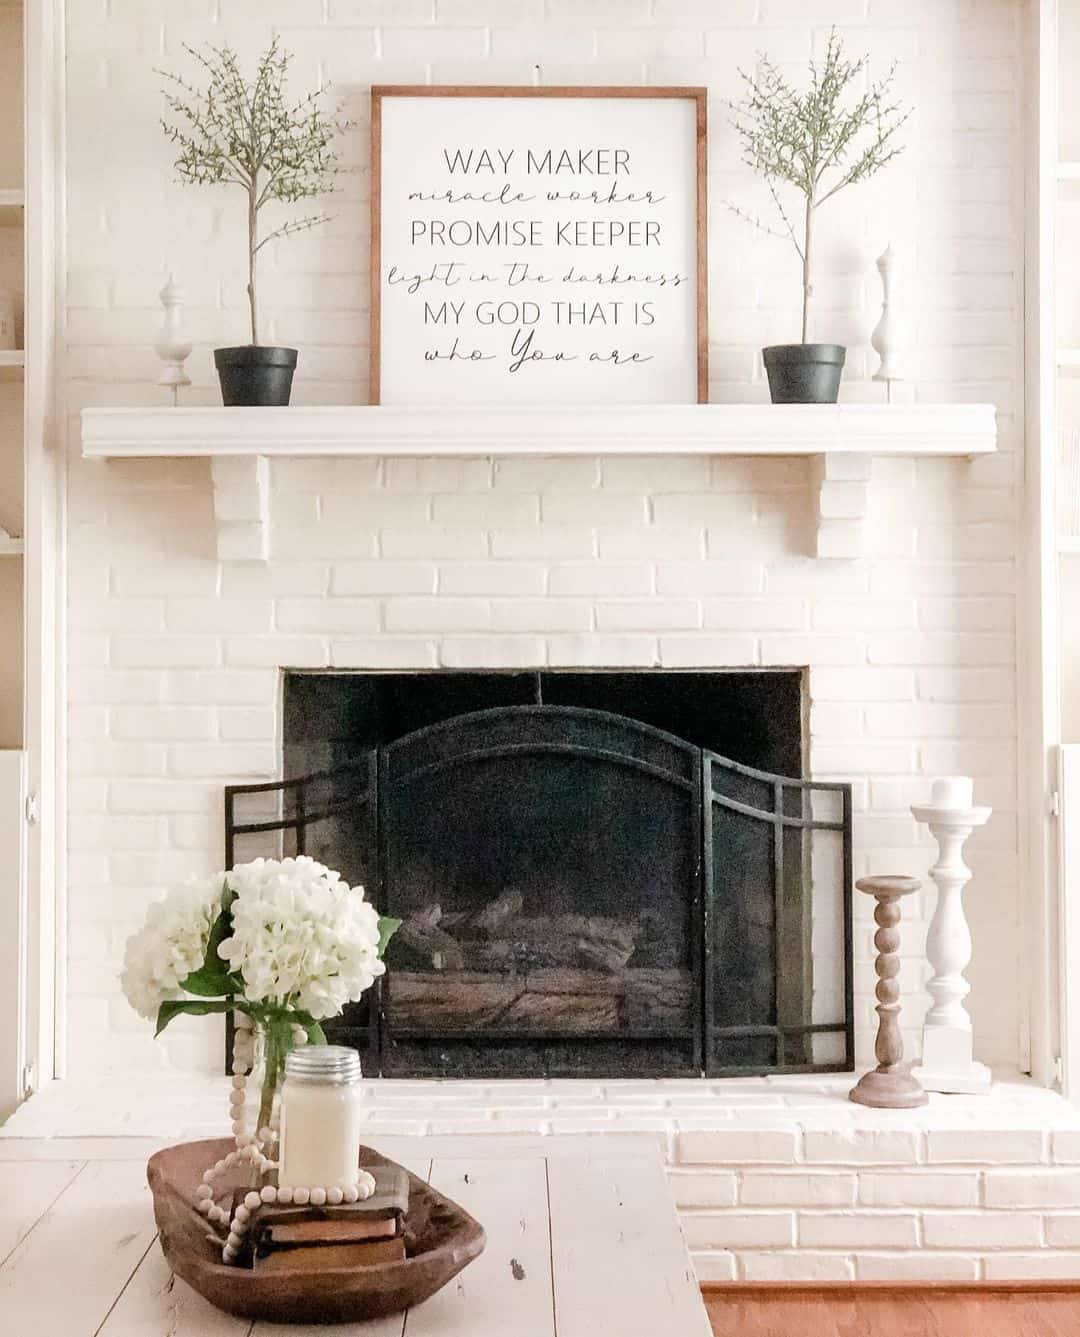 28 White Brick Fireplace Ideas to Update Your Home